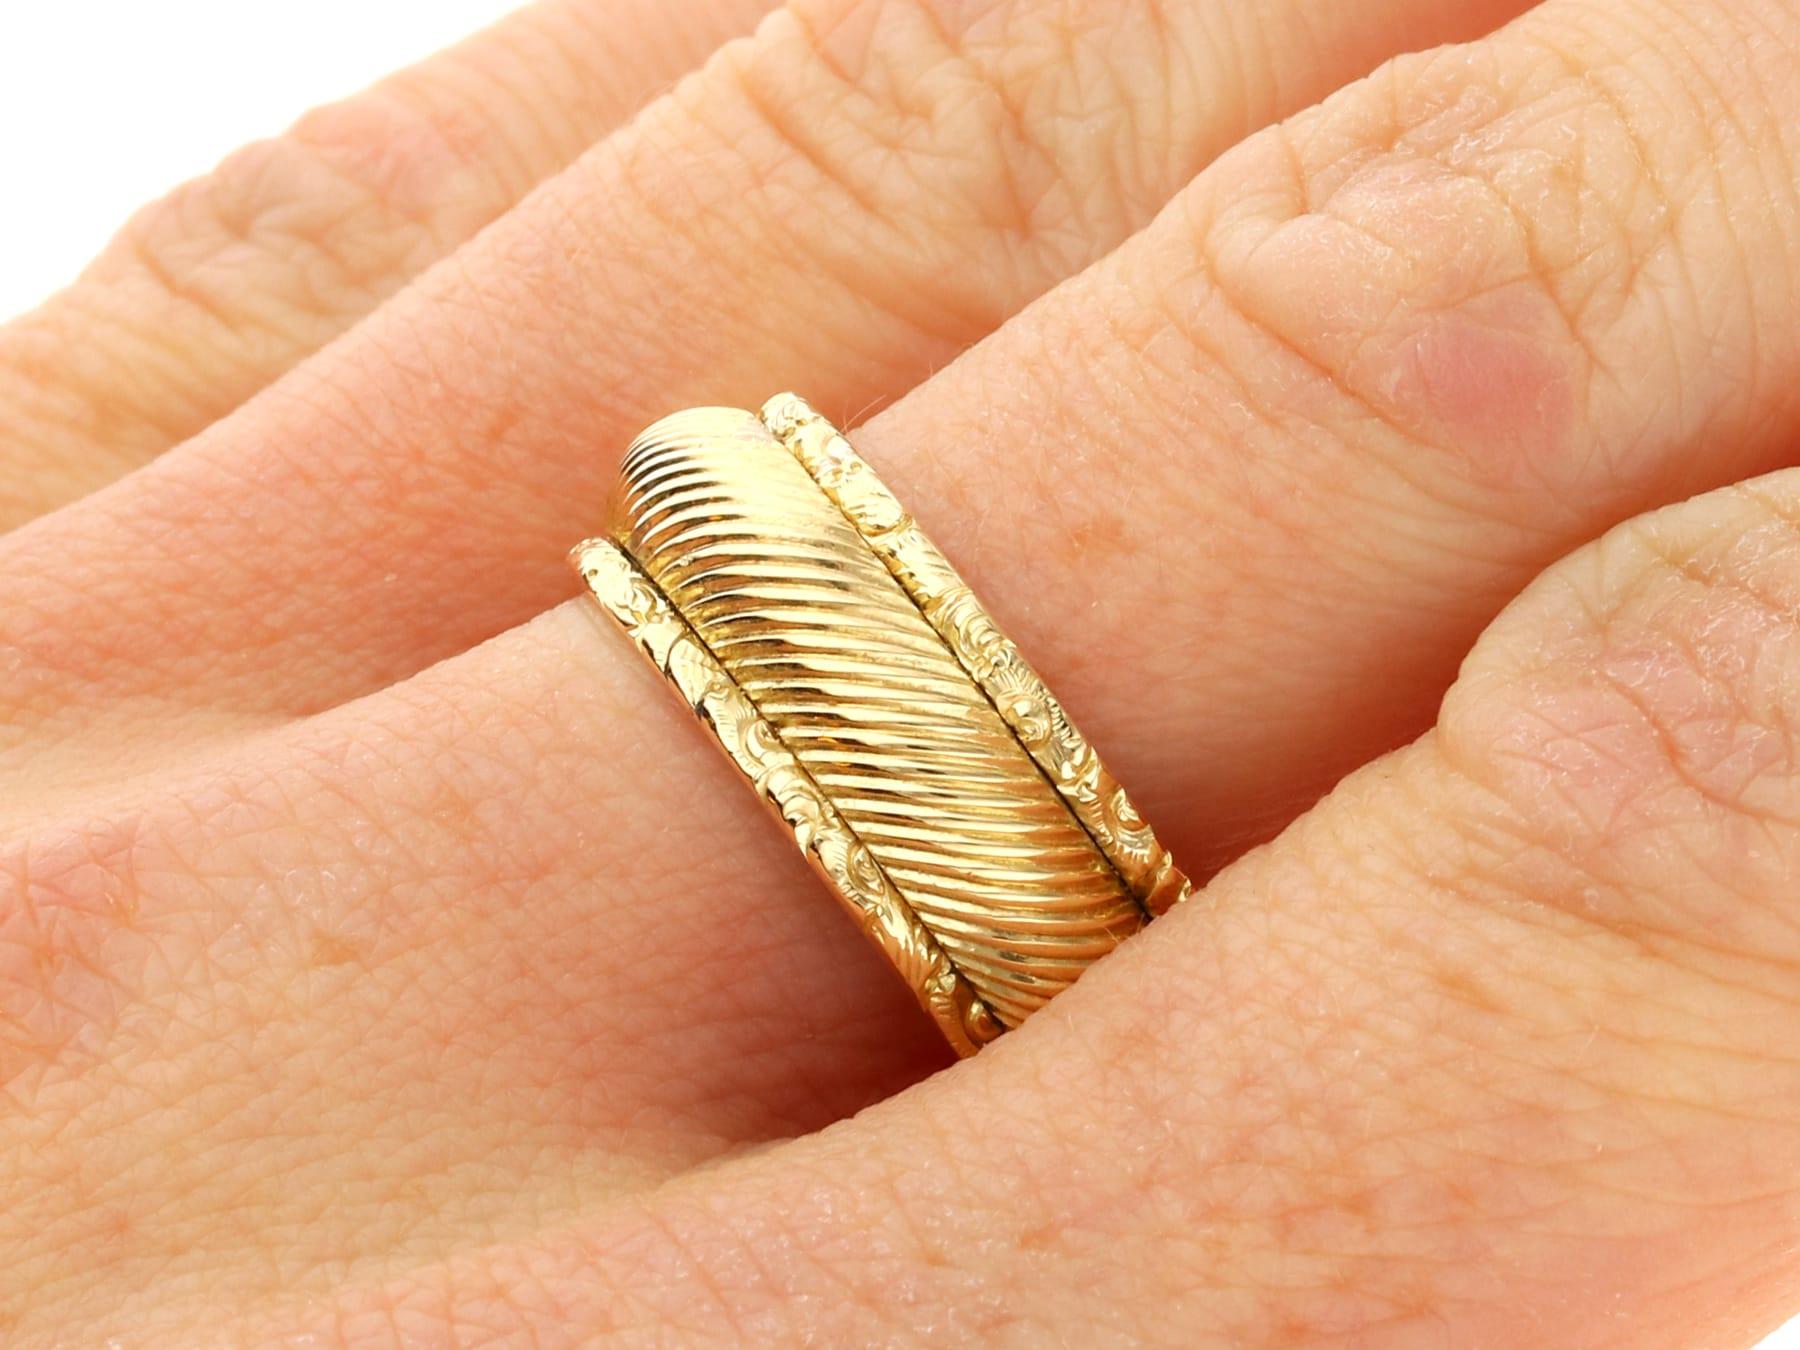 Antique 14k Yellow Gold Wedding Band / Ring Circa 1820 For Sale 4